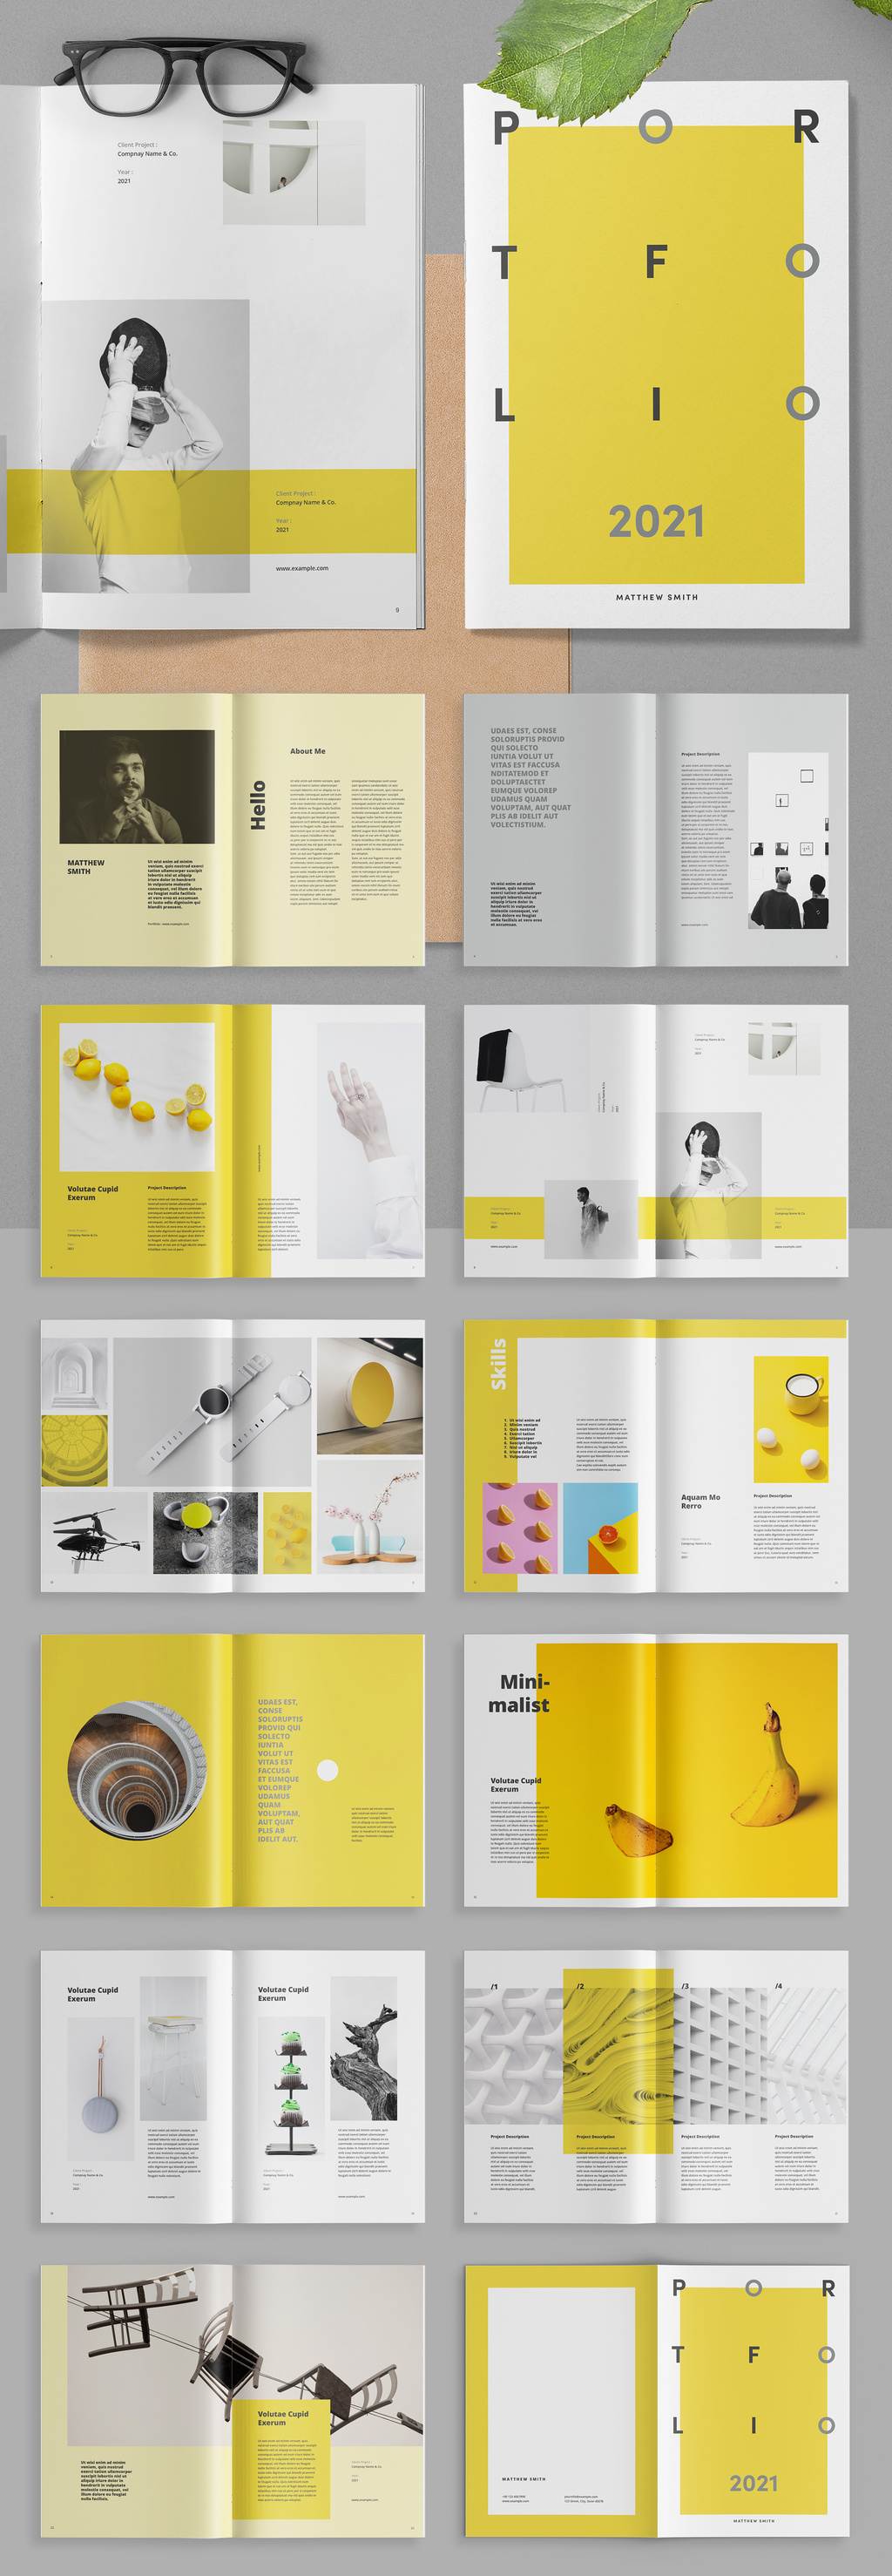 Portfolio template with yellow and gray accents.